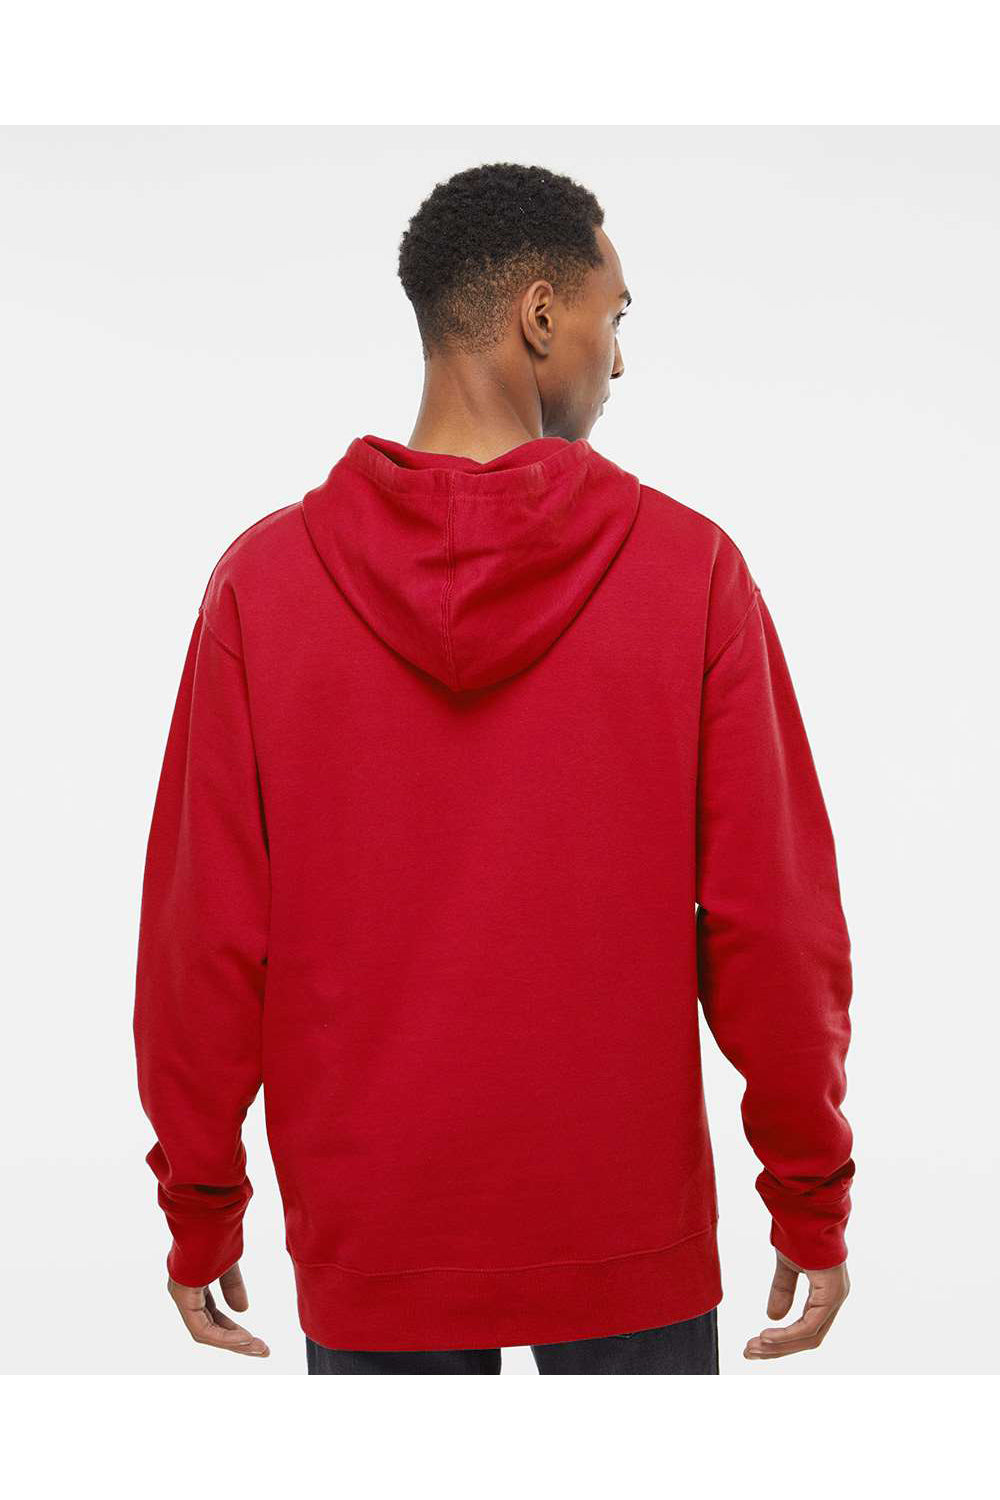 Independent Trading Co. SS4500 Mens Hooded Sweatshirt Hoodie Red Model Back